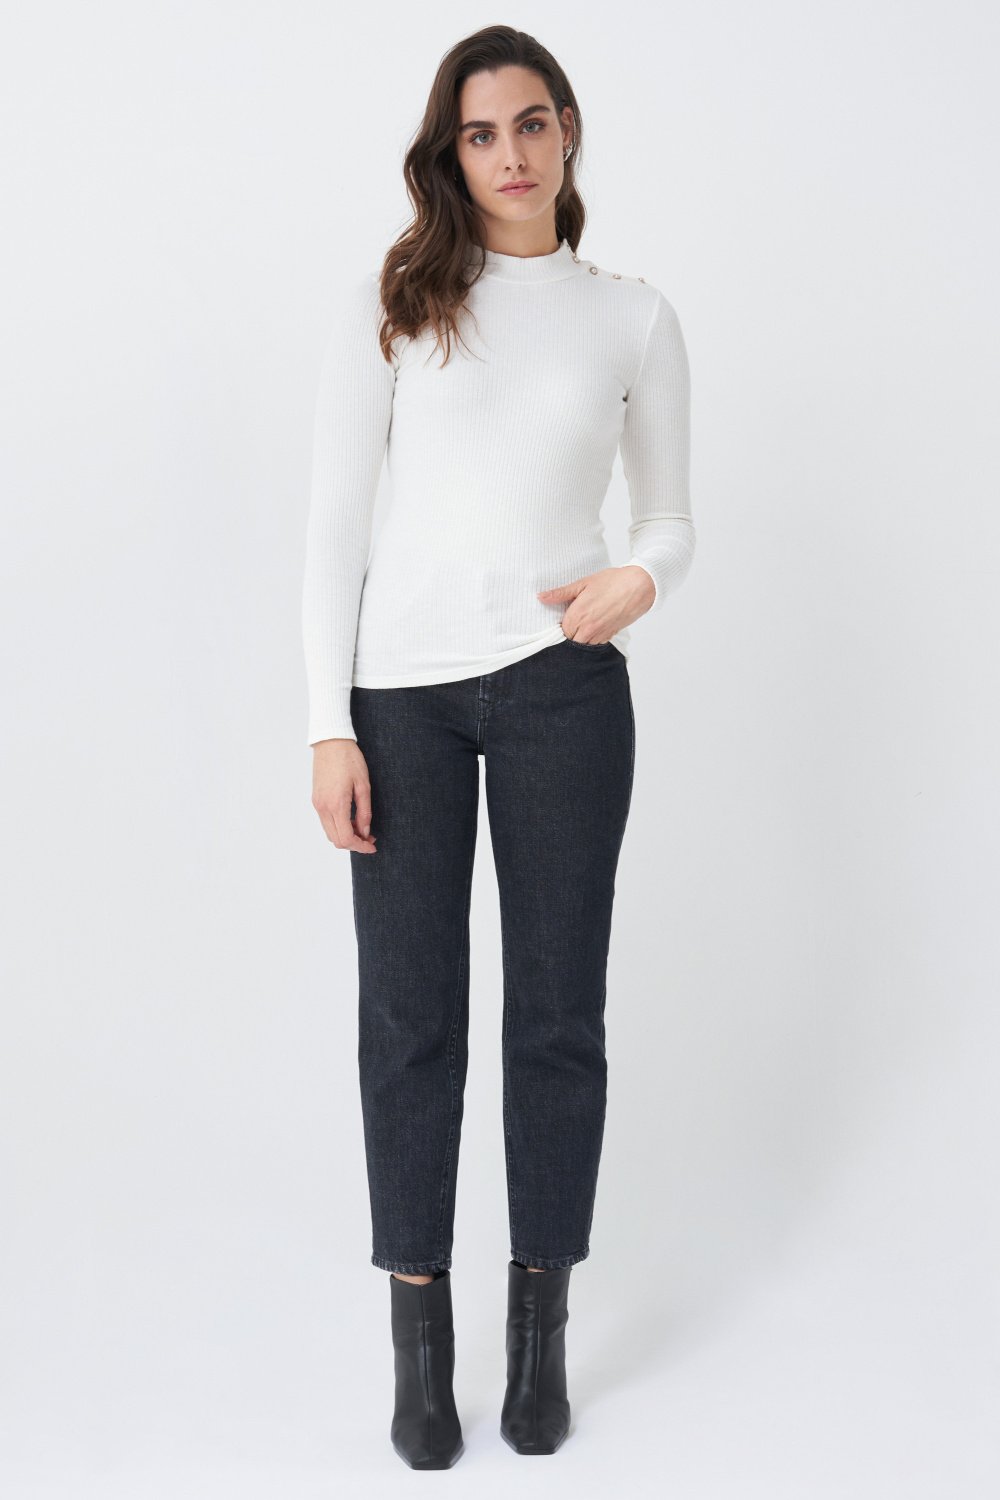 Mesh knit sweater with buttons - Salsa